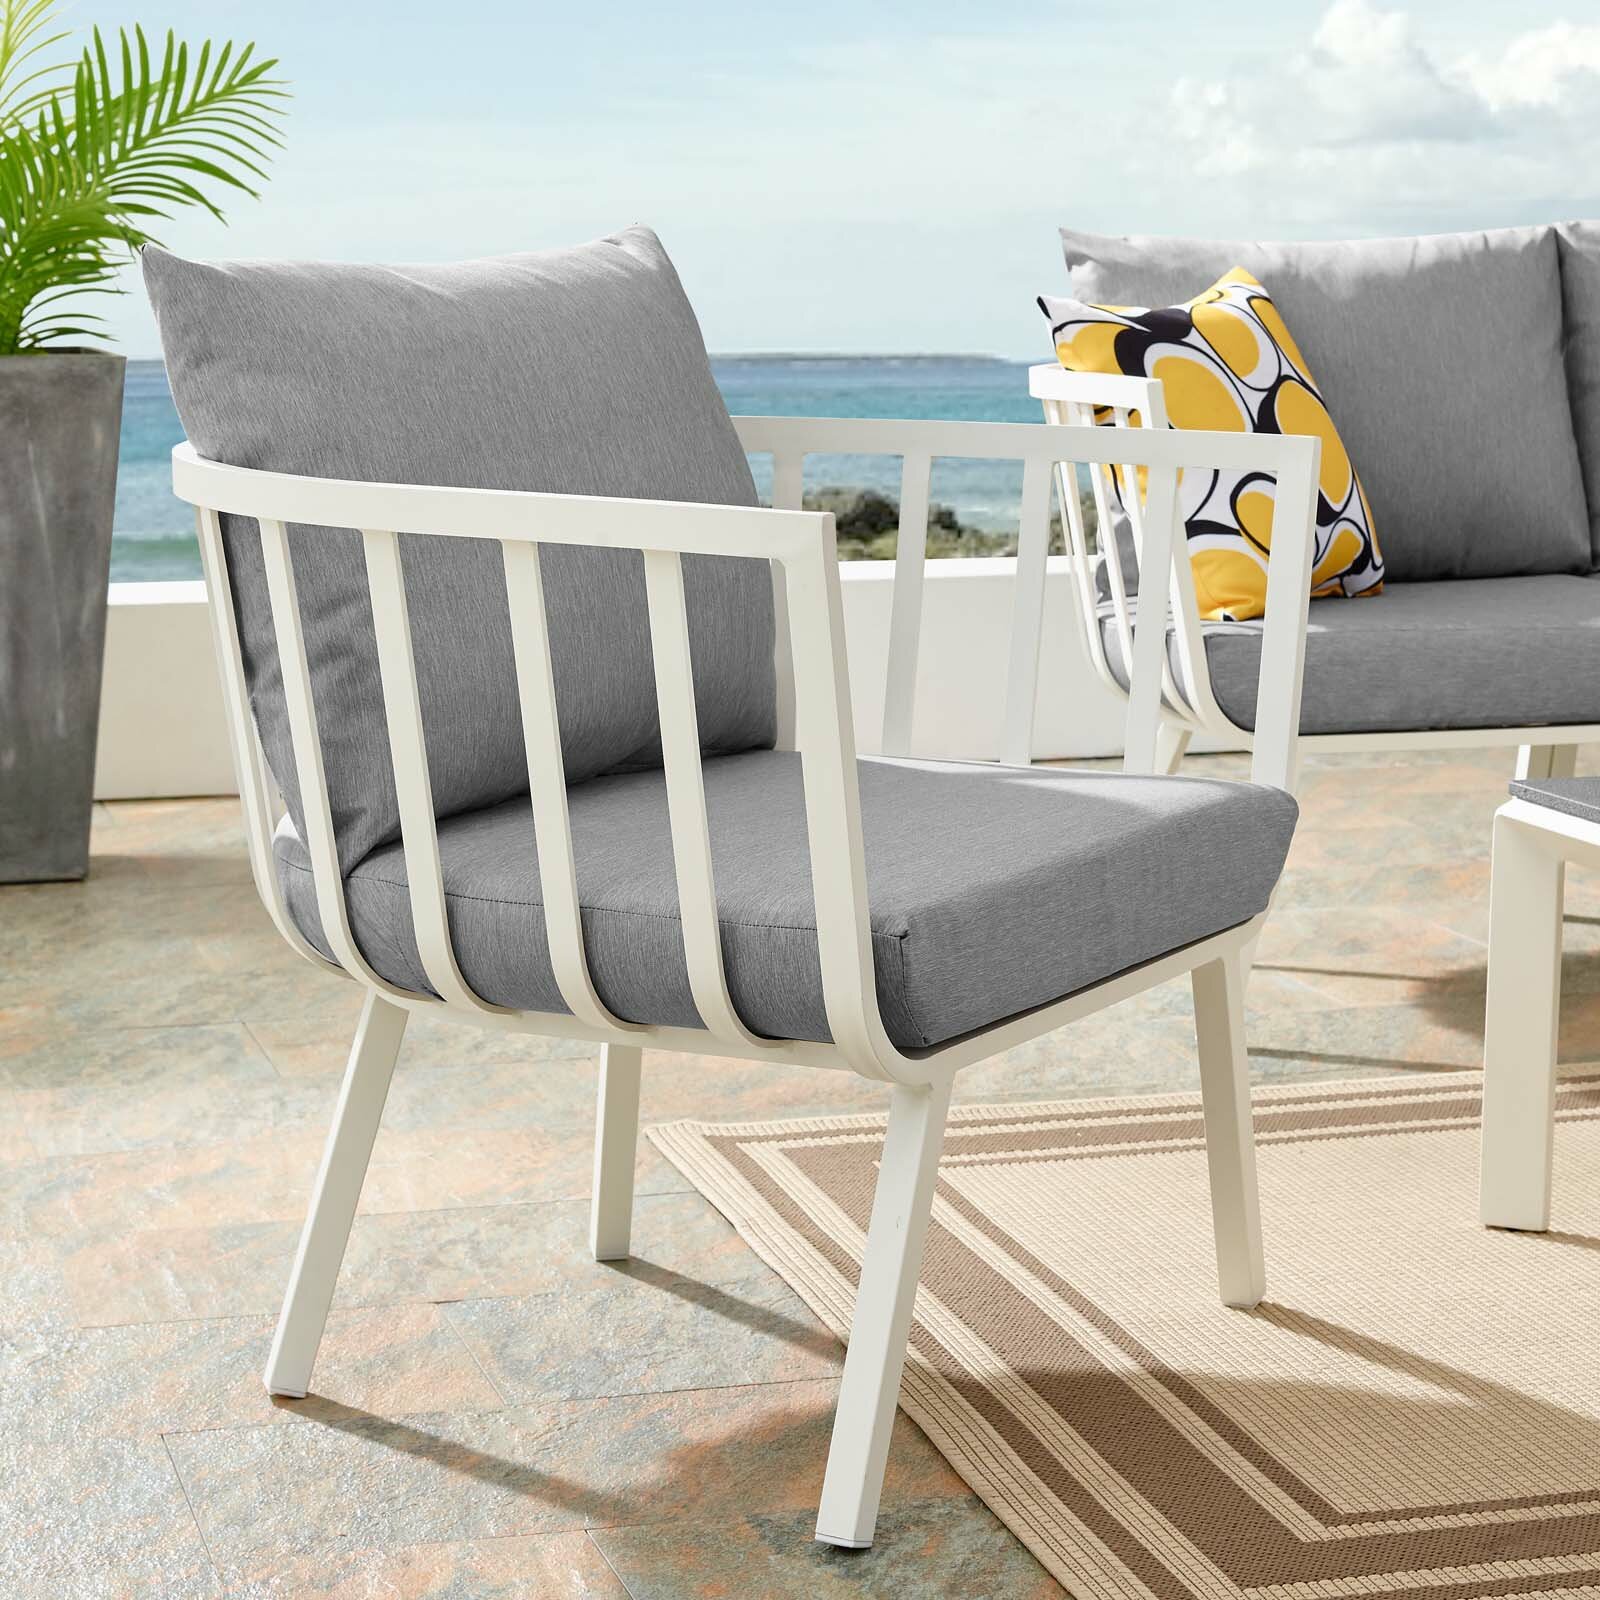 Montclaire Outdoor Patio Chair With Cushions Joss Main